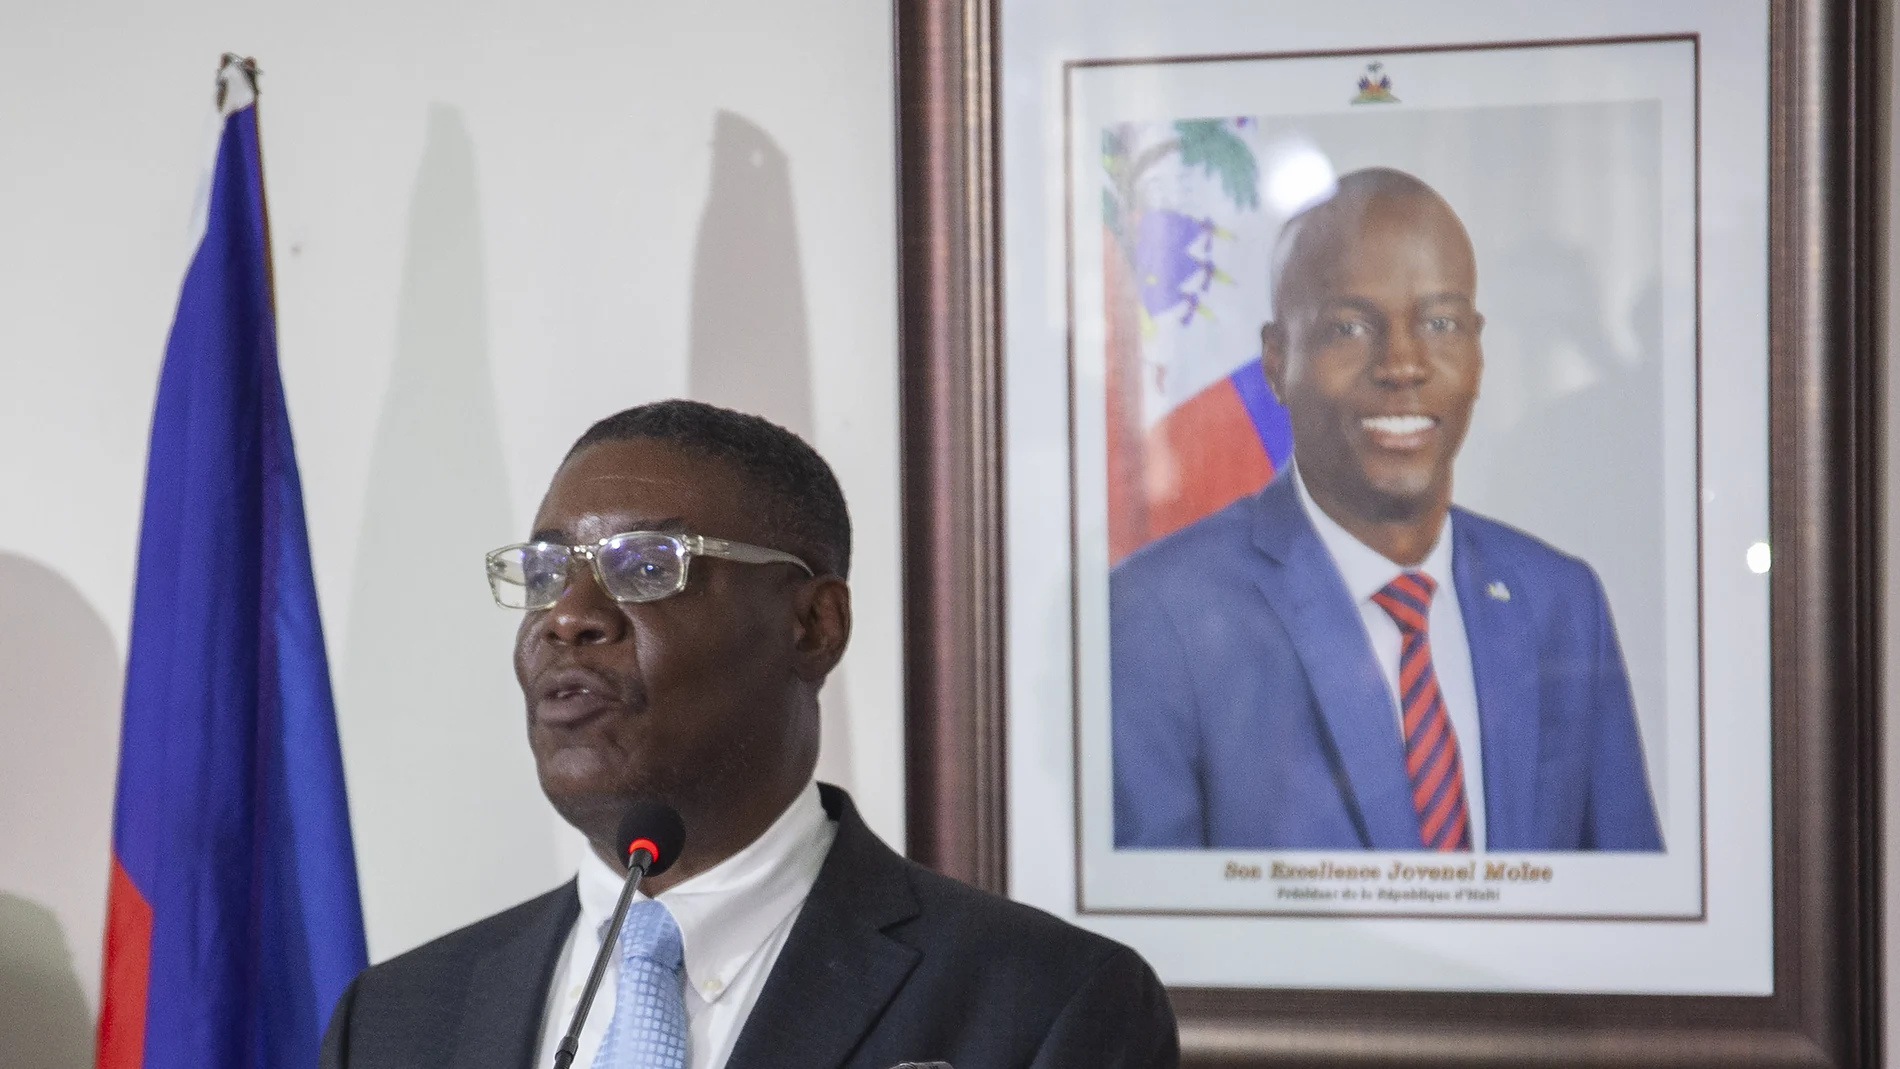 Haiti's newly-named Justice Minister Liszt Quitel, speaks during his installation ceremony, backdropped by a photo of assassinated President Jovenel Moise, in Port-au-Prince, Haiti, Thursday, Sept. 16, 2021. (AP Photo/Richard Pierrin)